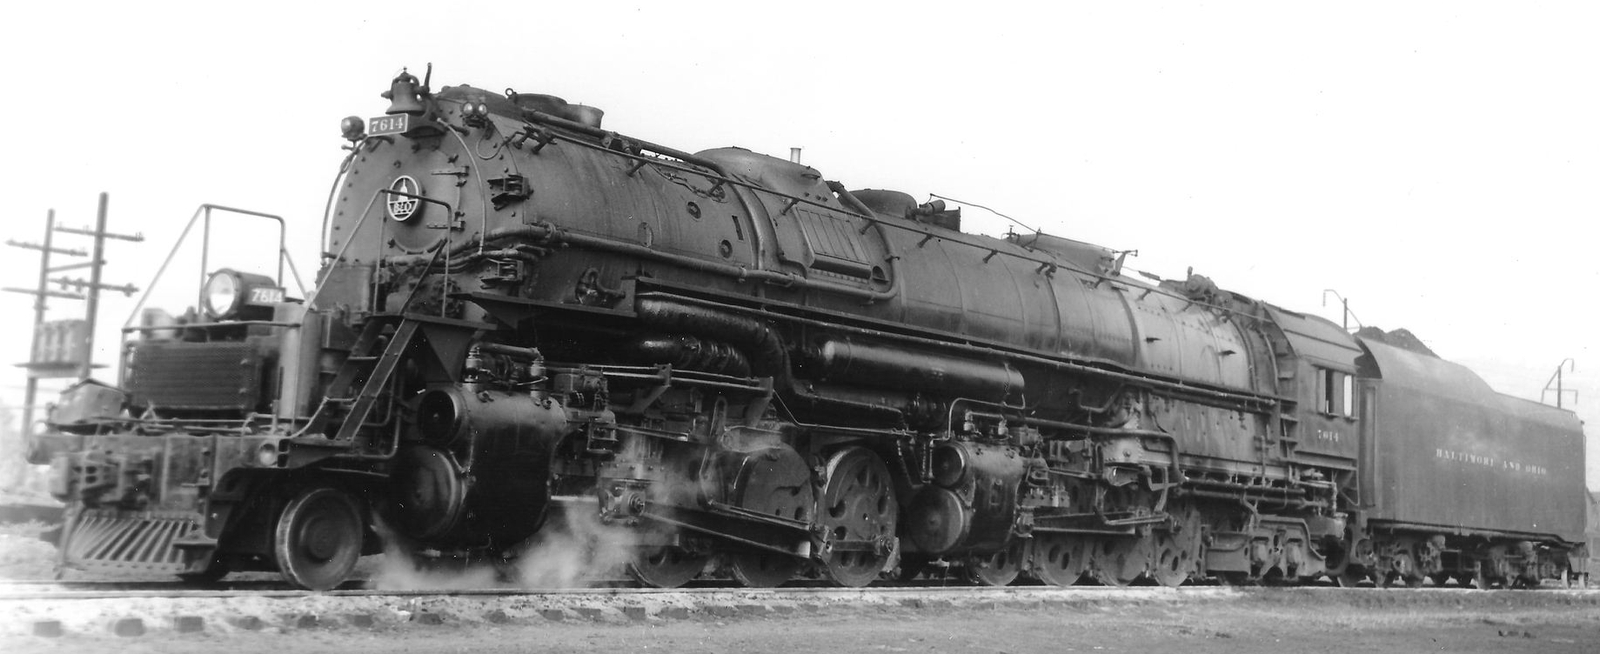 No. 7614 in the early fifties